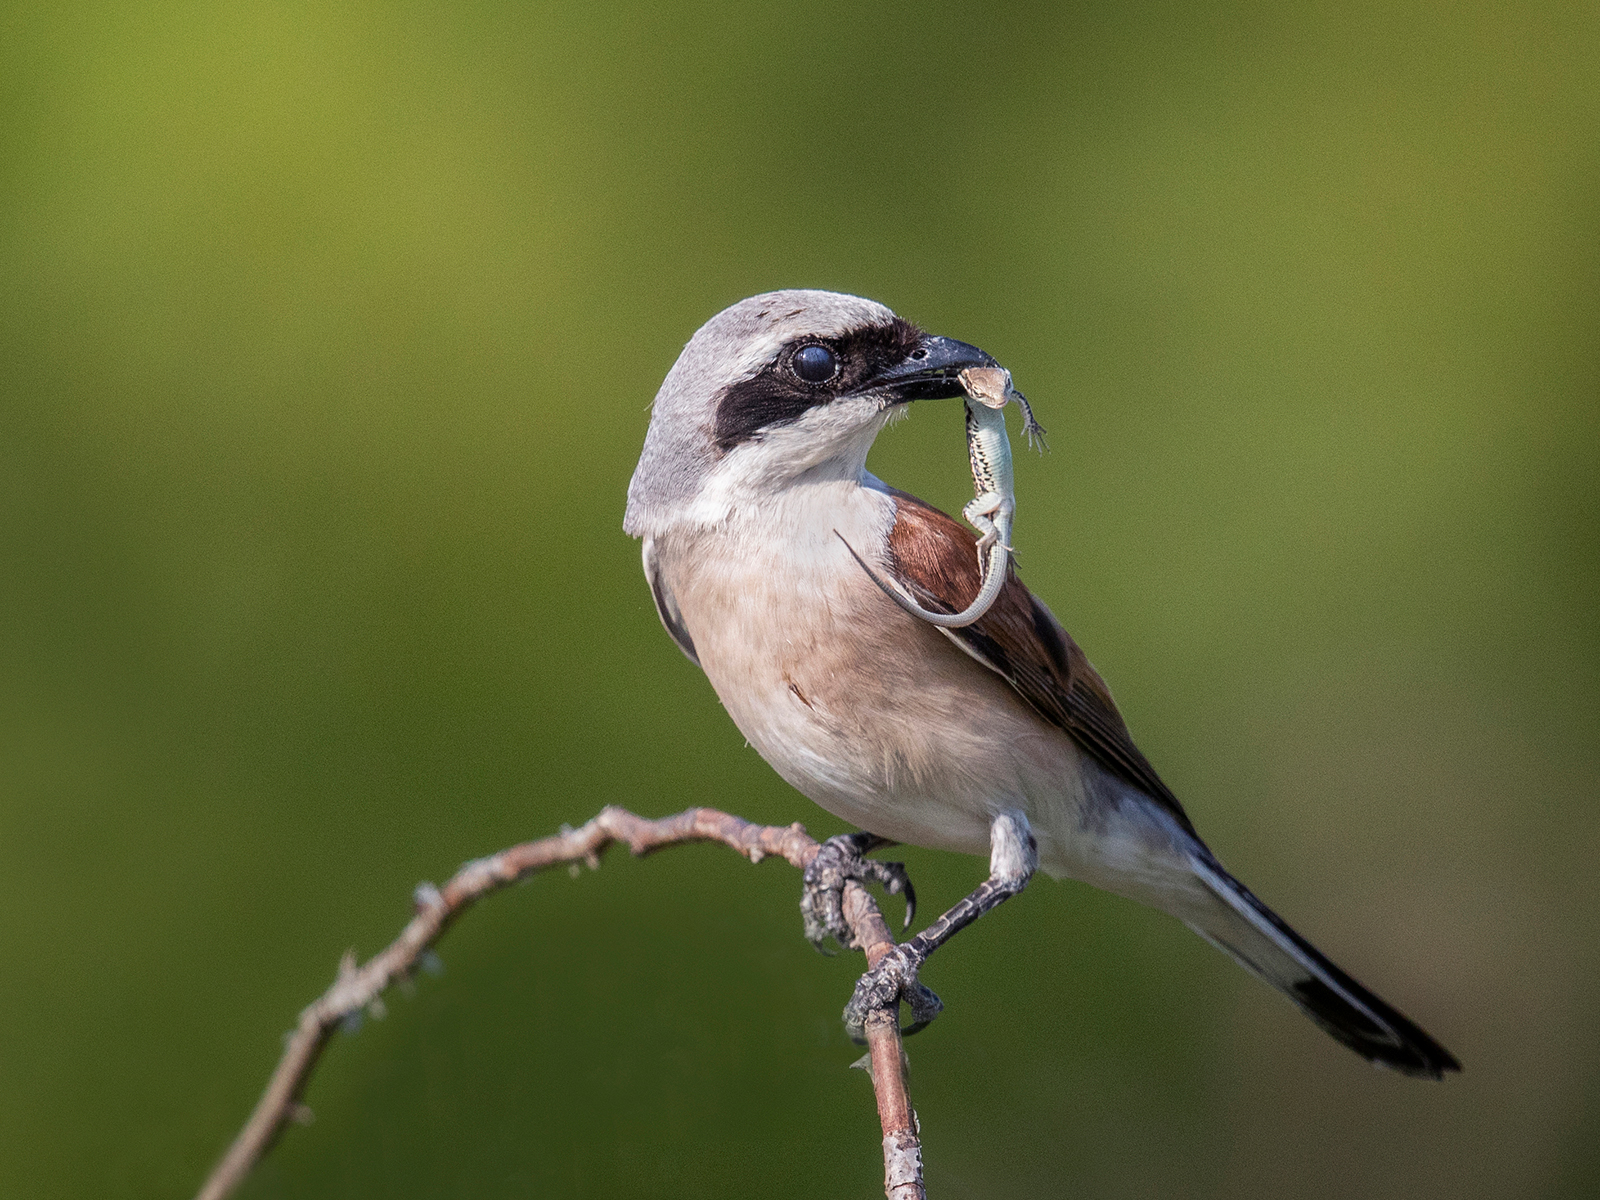 Red-Backed-Shrike-with-Lizard